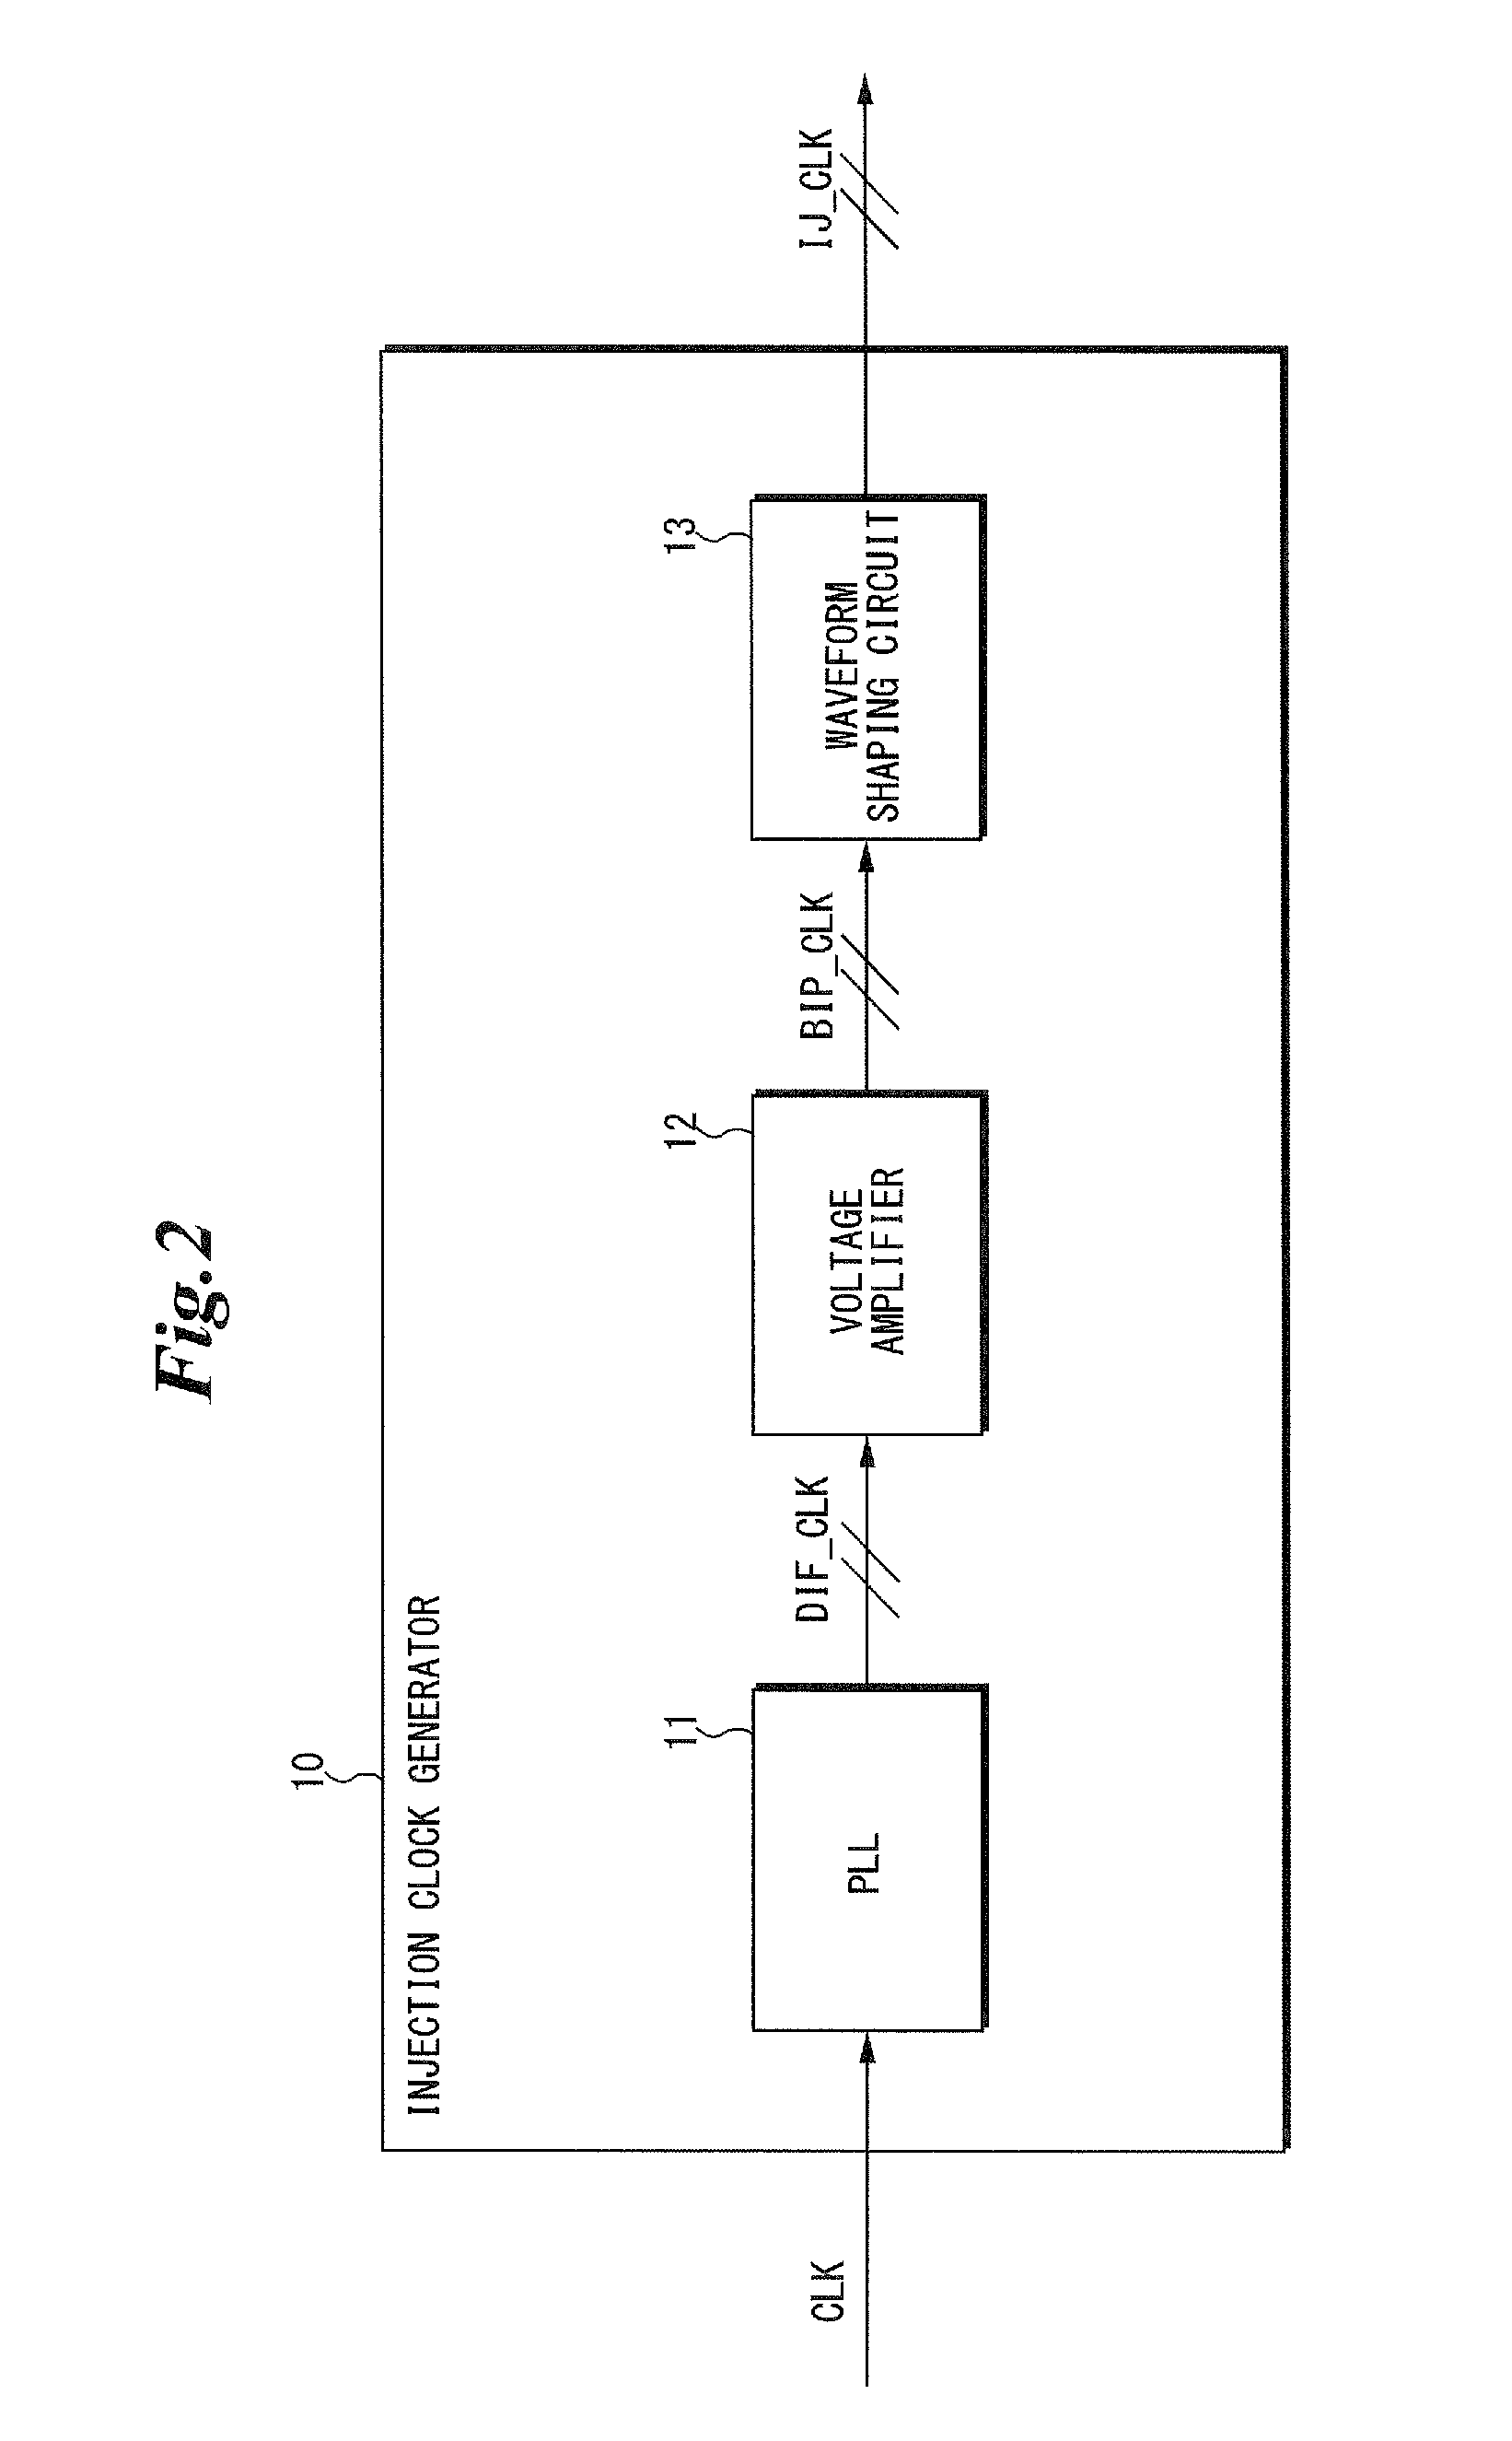 Clock generator and method of adjusting phases of multiphase clocks by the same